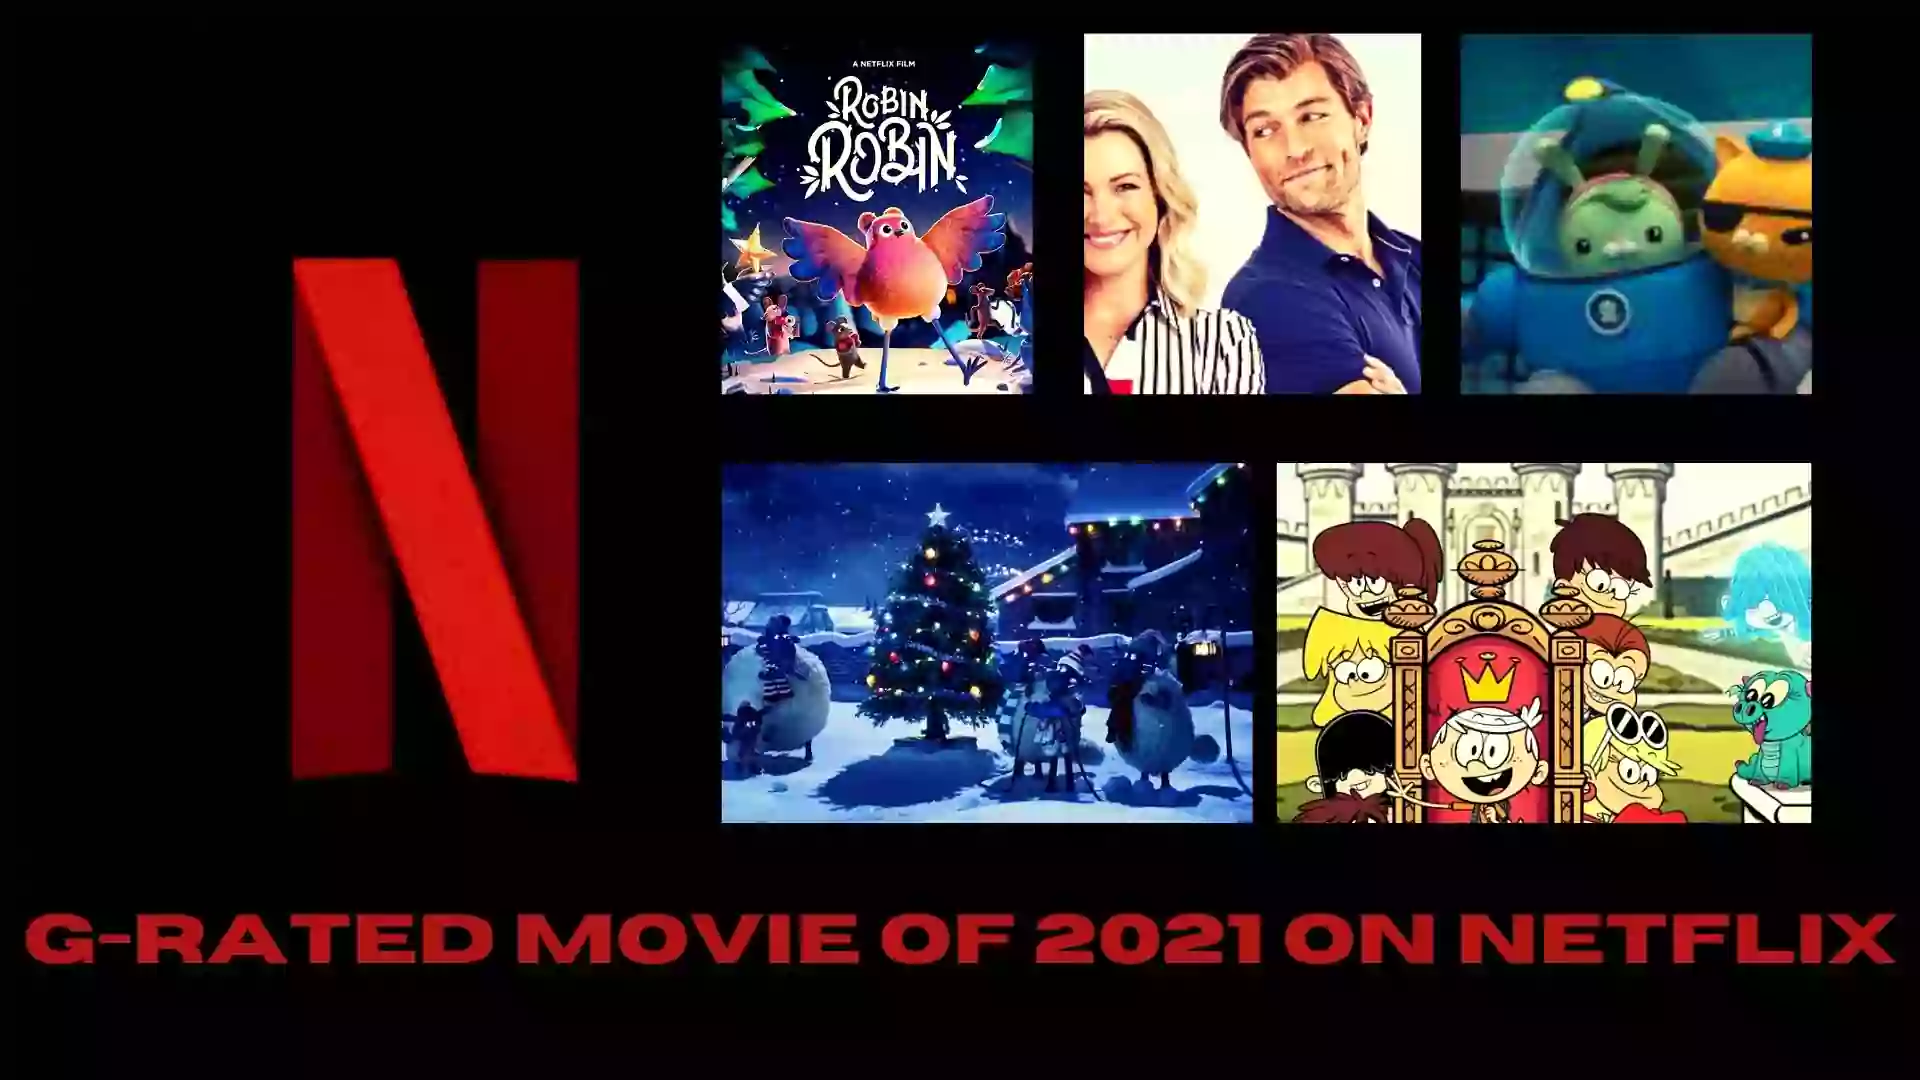 G-Rated Movie of 2021 on Netflix